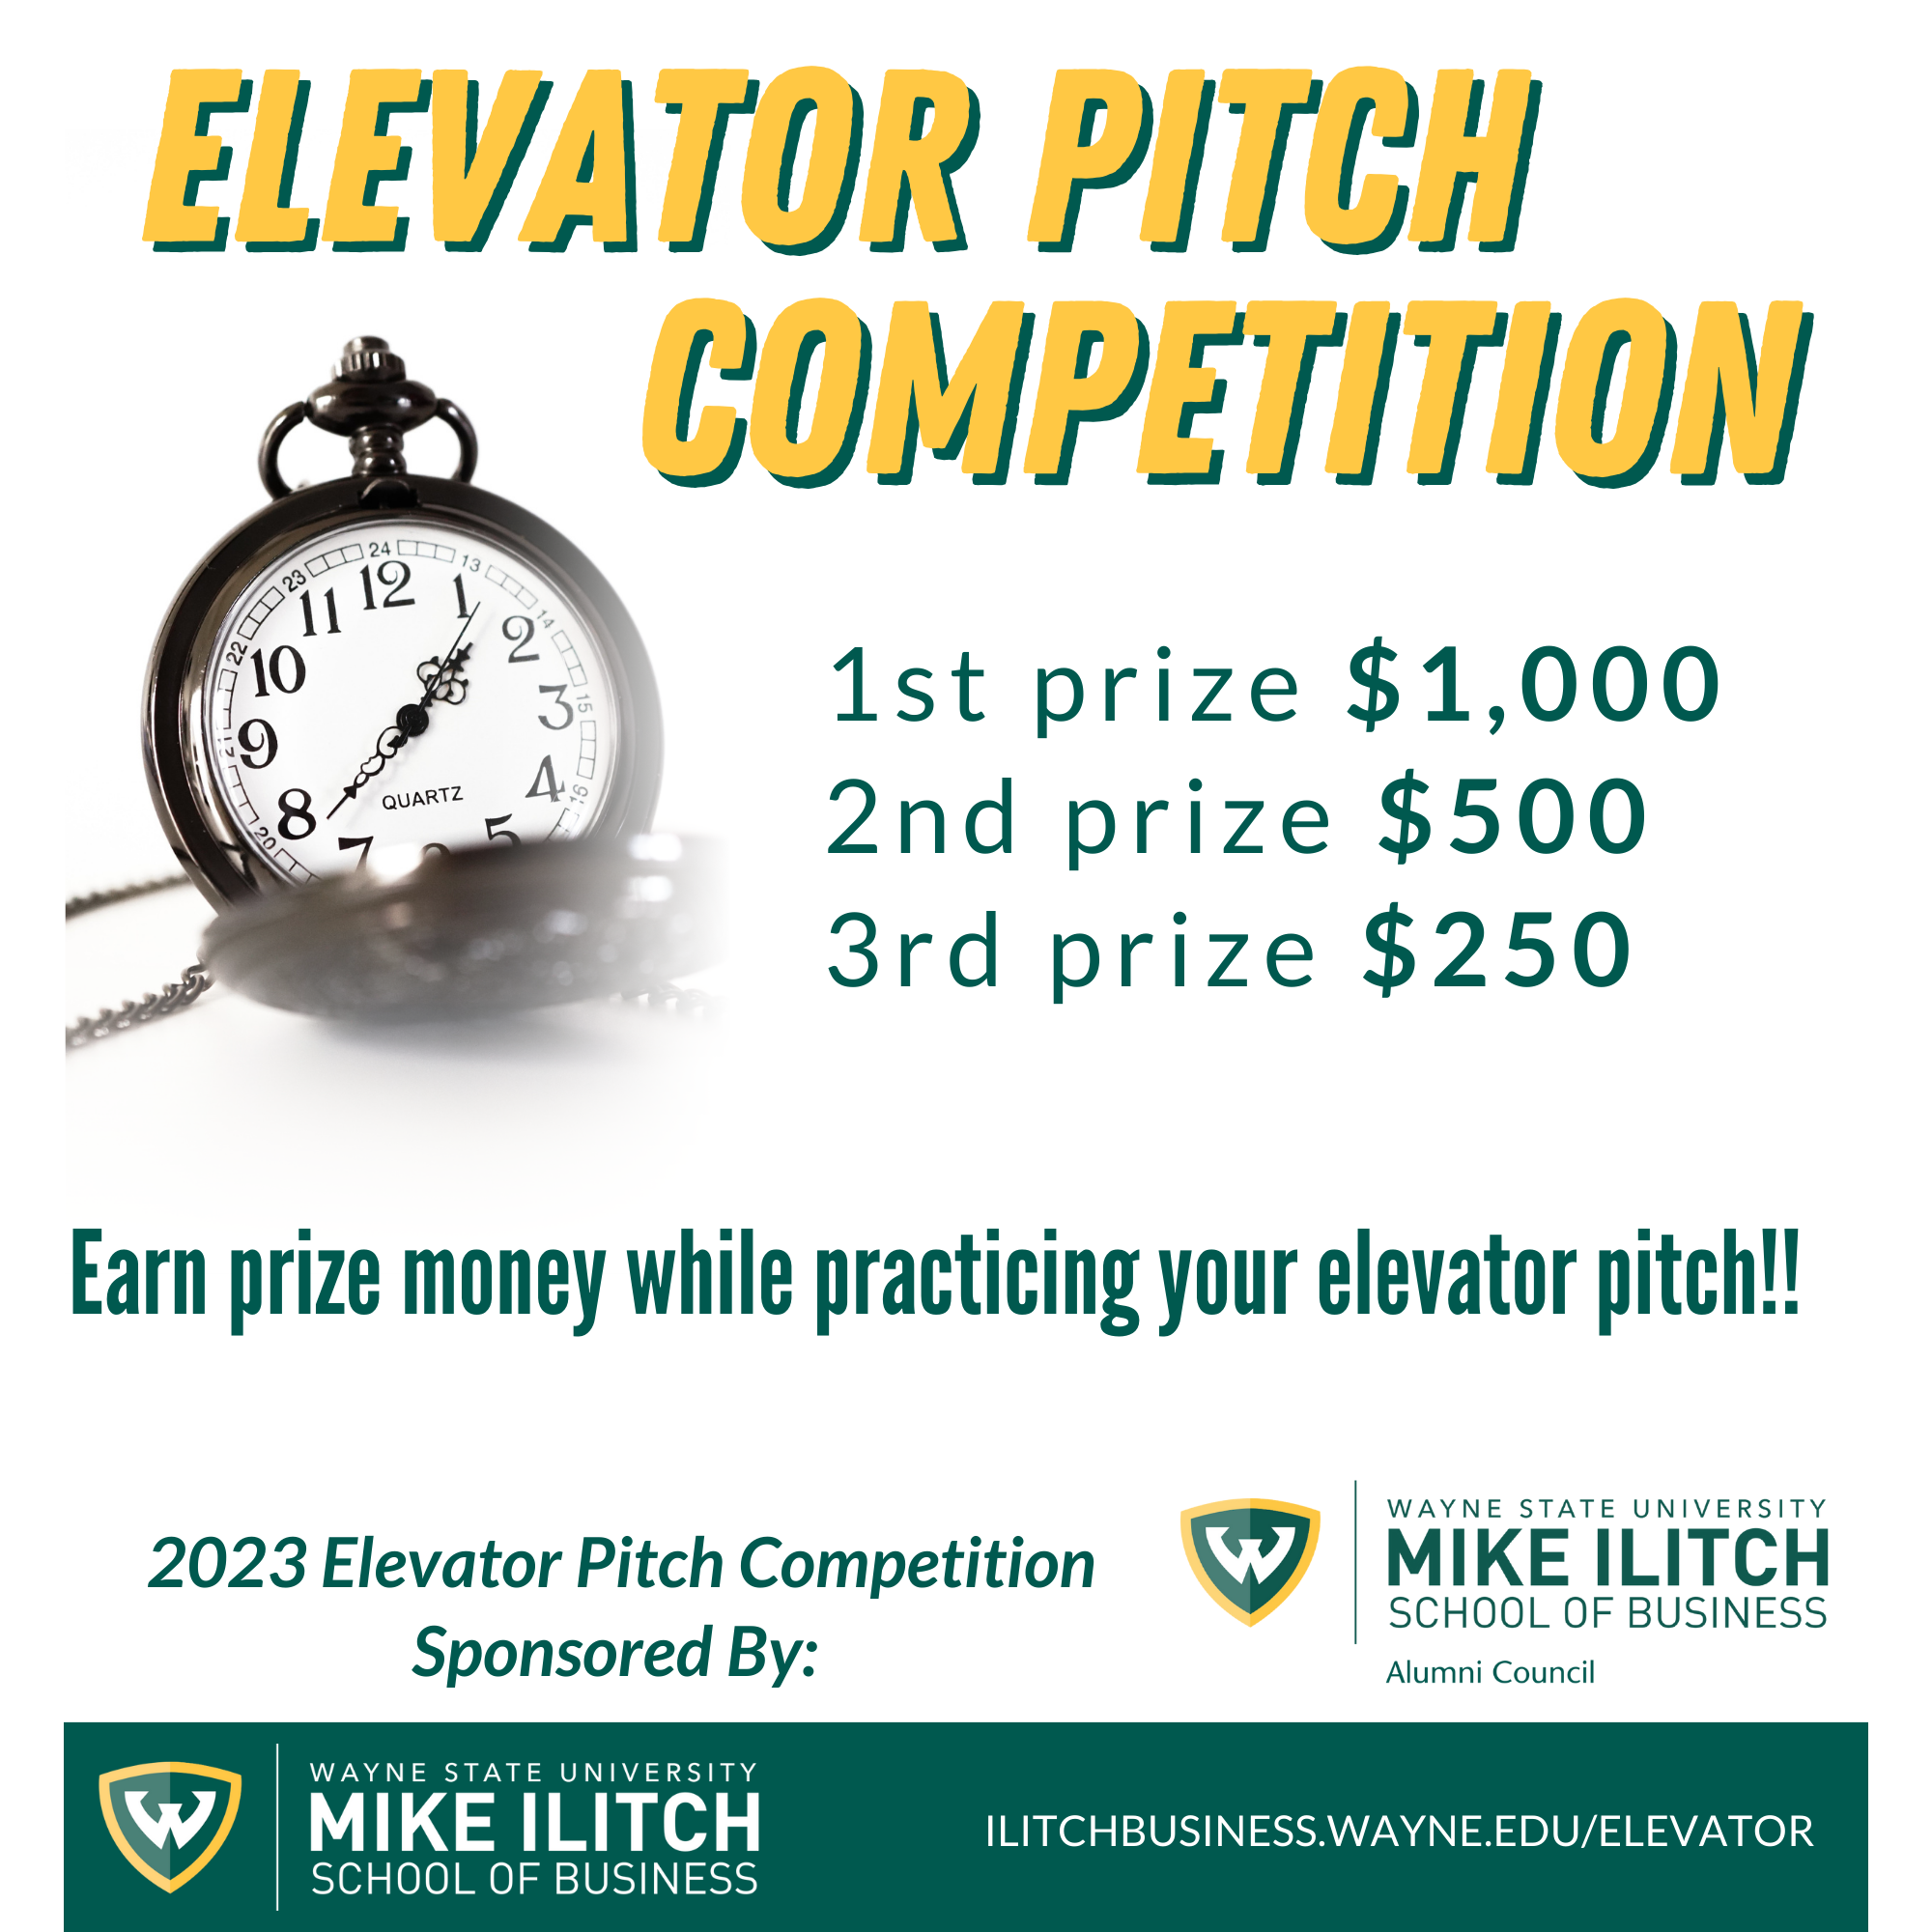 Sign up for the Elevator Pitch Competition today for your chance to win prize money while improving your interviewing skills!